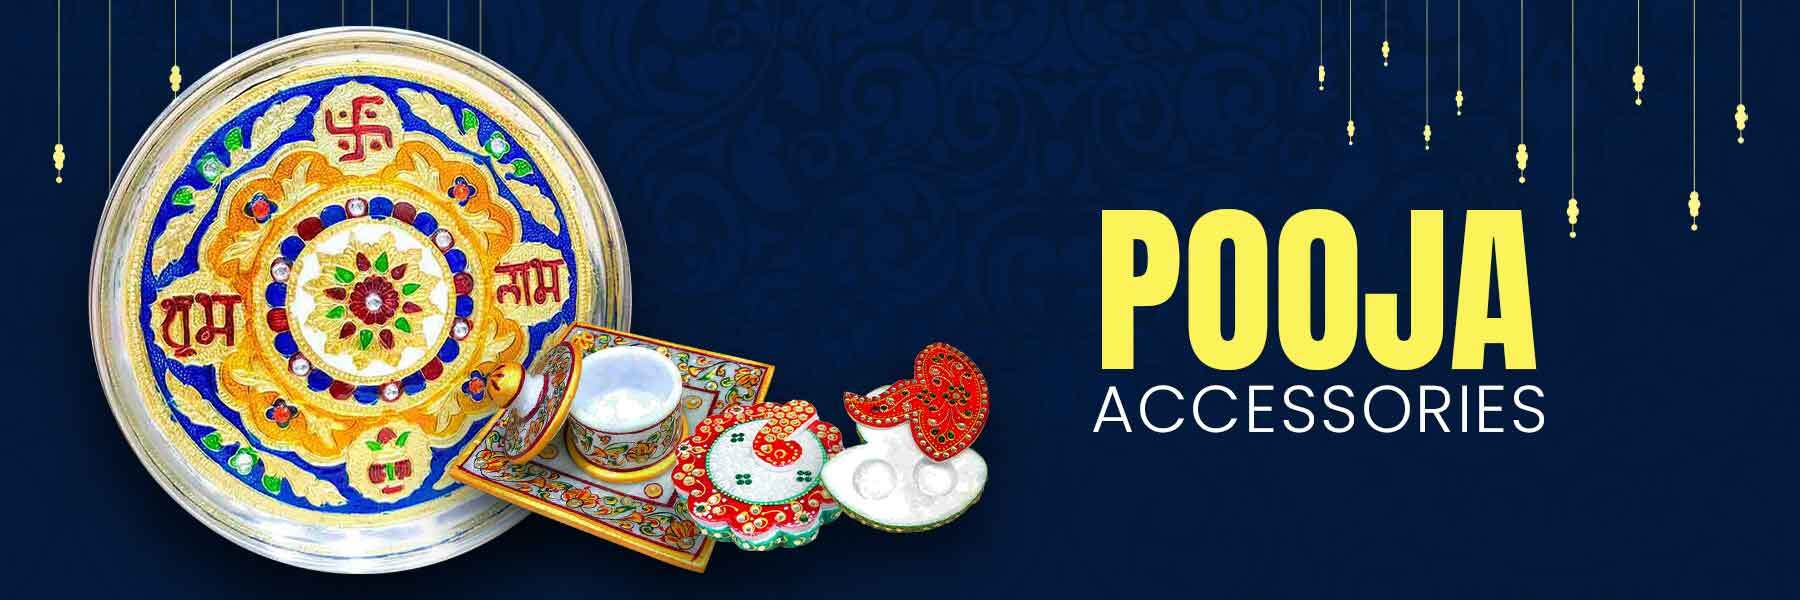 Puja Accesories - Pooja Accessory for Daily Needs